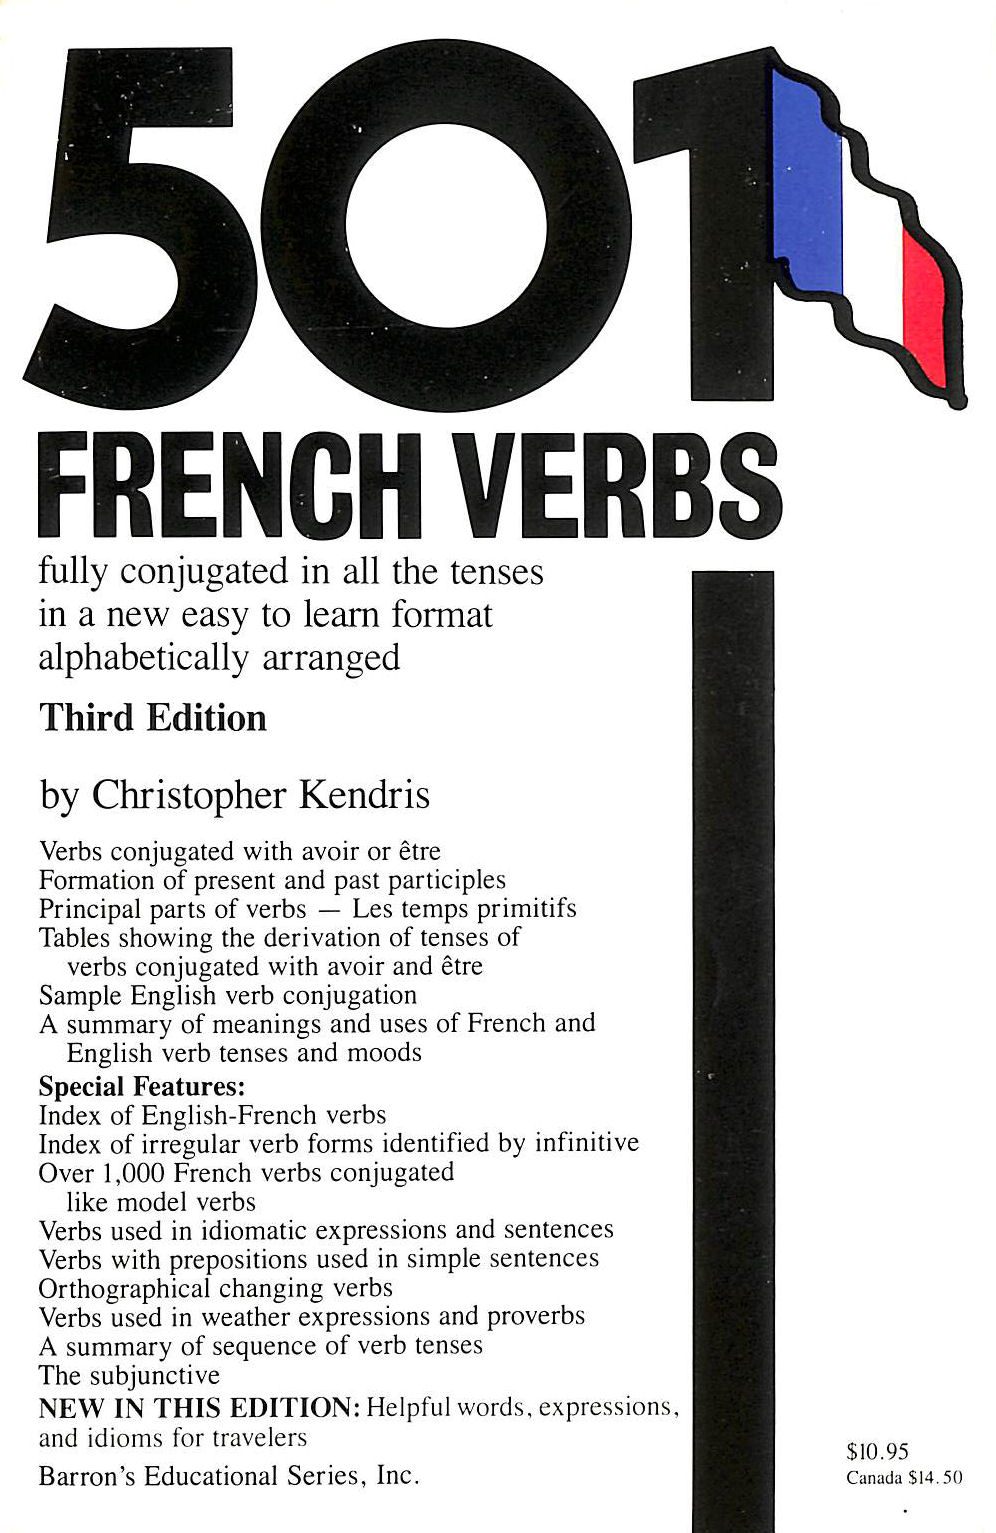 KENDRIS, CHRISTOPHER - 501 French Verbs (501 verbs series)